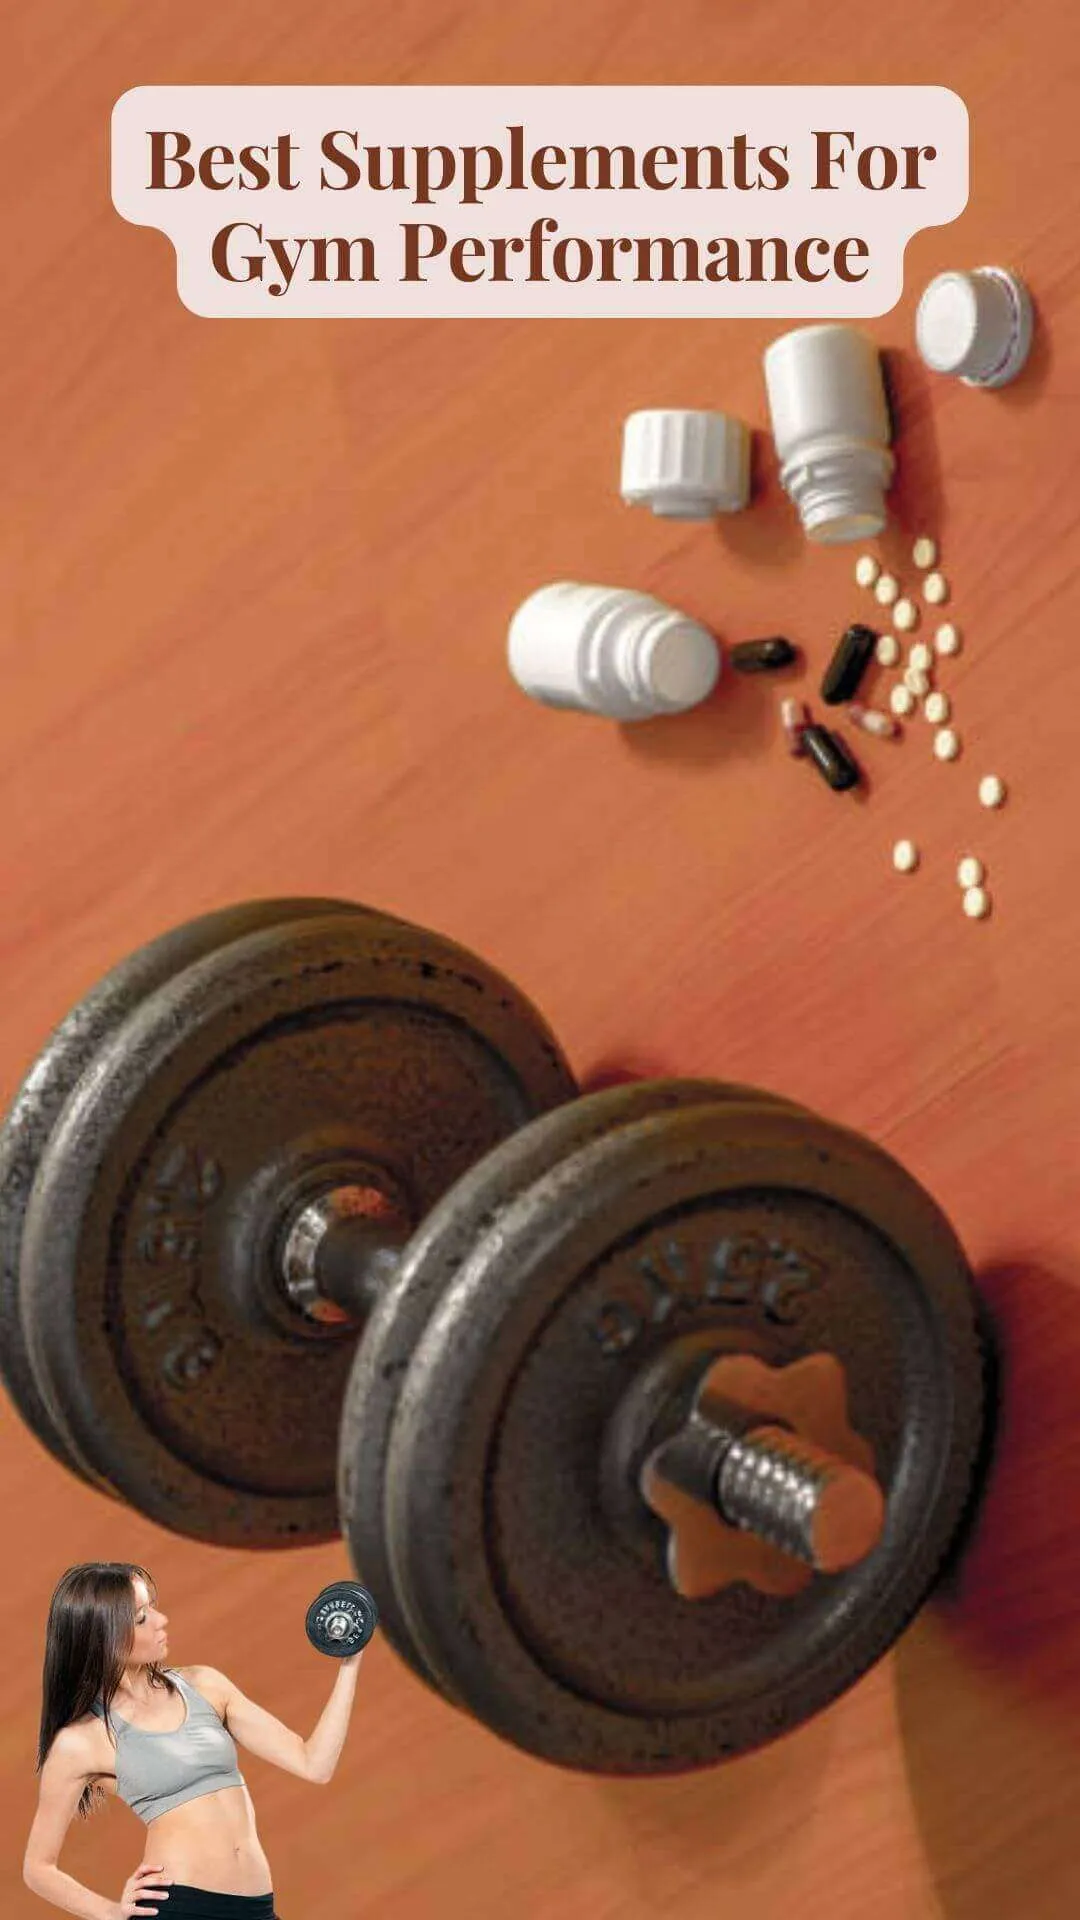 Power Up Your Workout: Best Supplements for Gym Performance